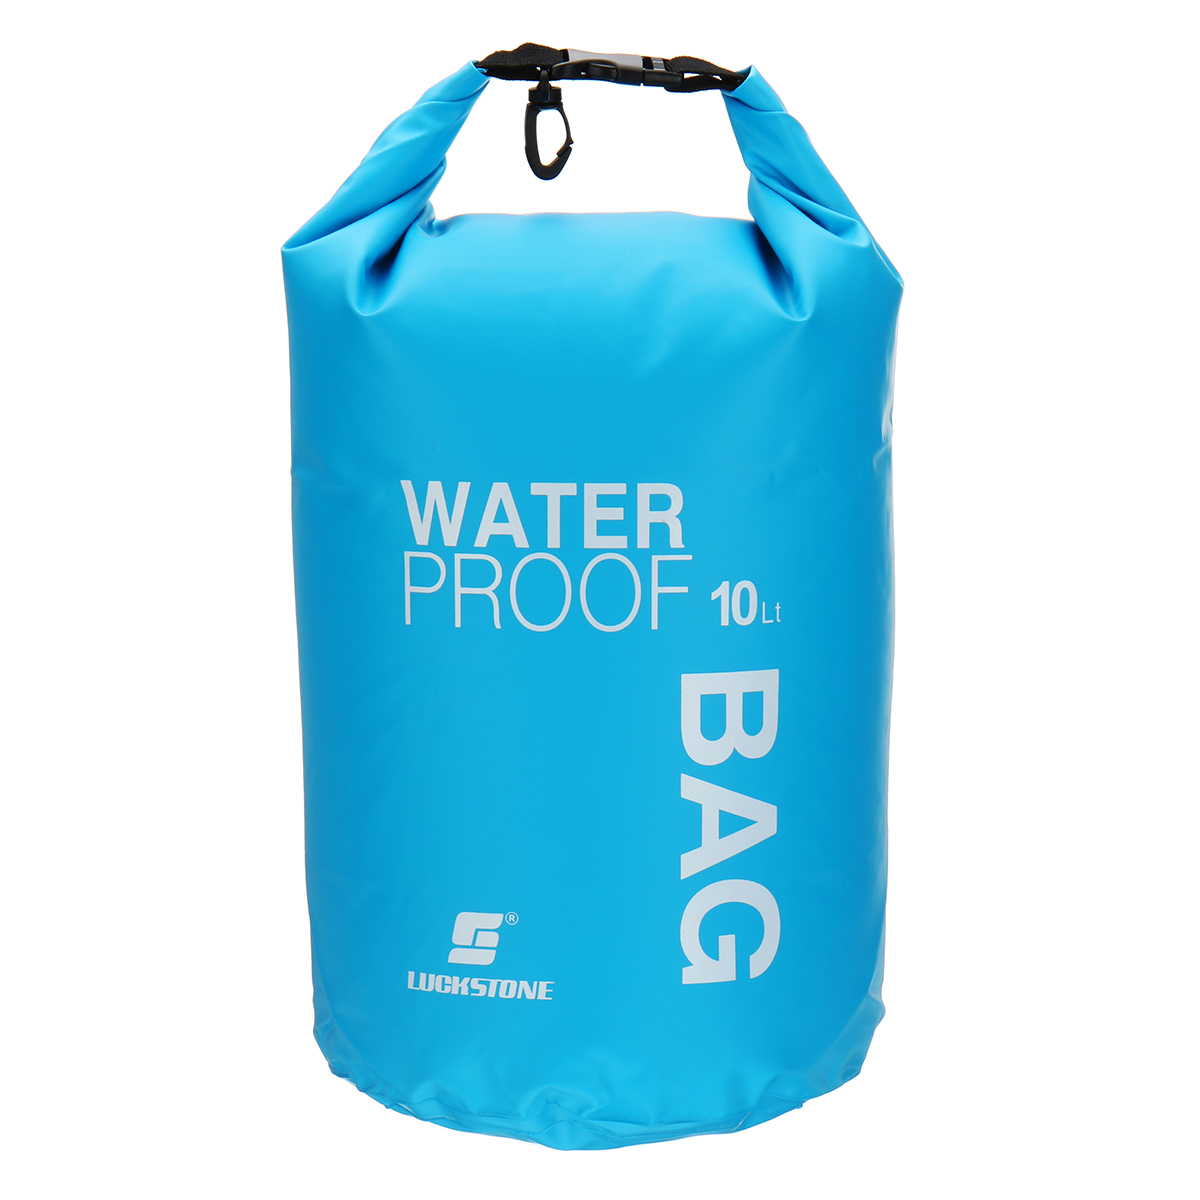 10L-Outdoor-Swimming-Air-Inflation-Floating-Mobile-Phone-Camera-Storage-PVC-Waterproof-Bag-1820807-4